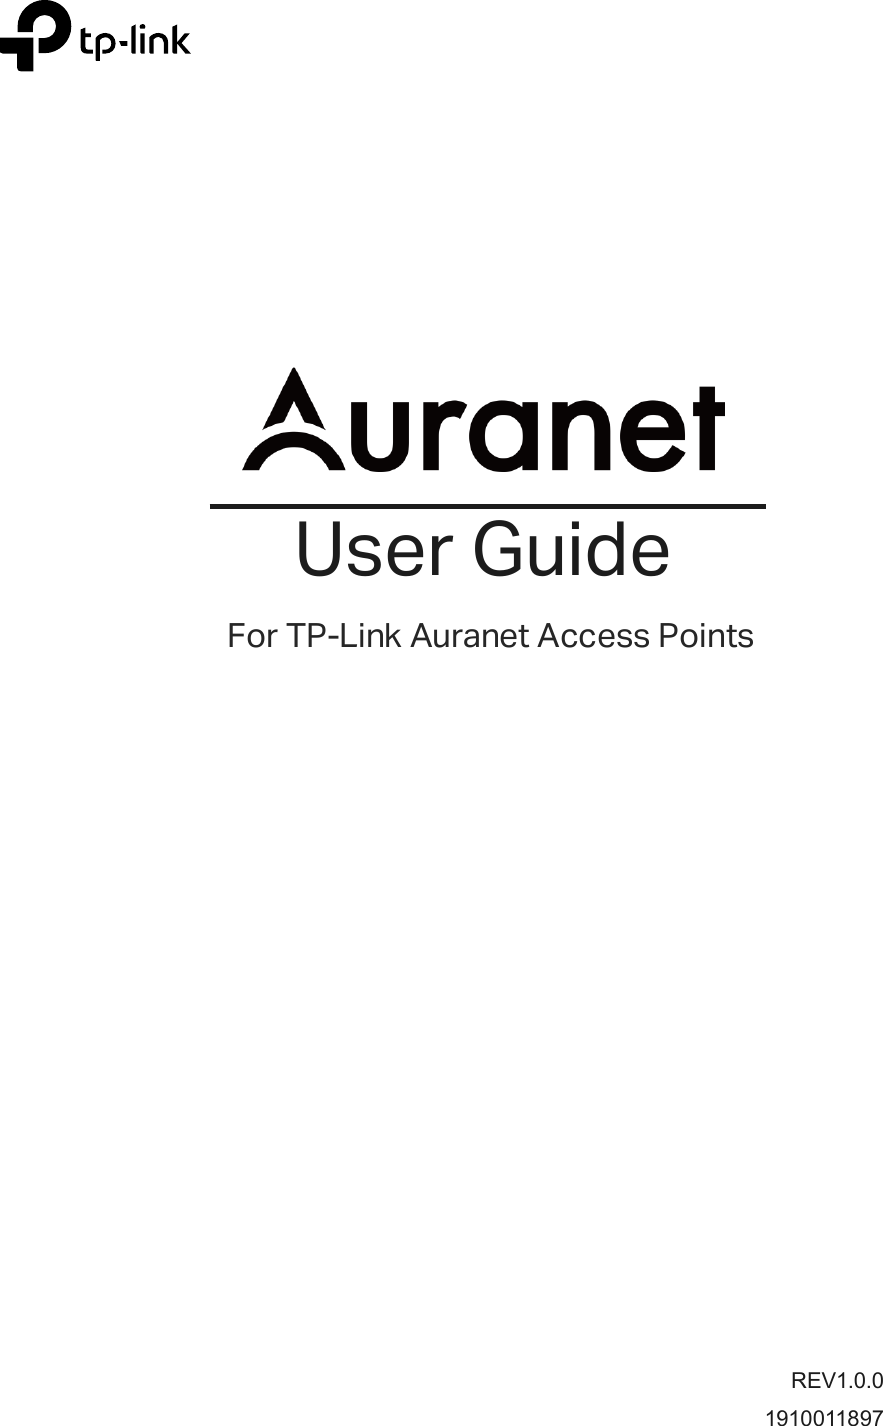            REV1.0.0 1910011897  User Guide For TP-Link Auranet Access Points        